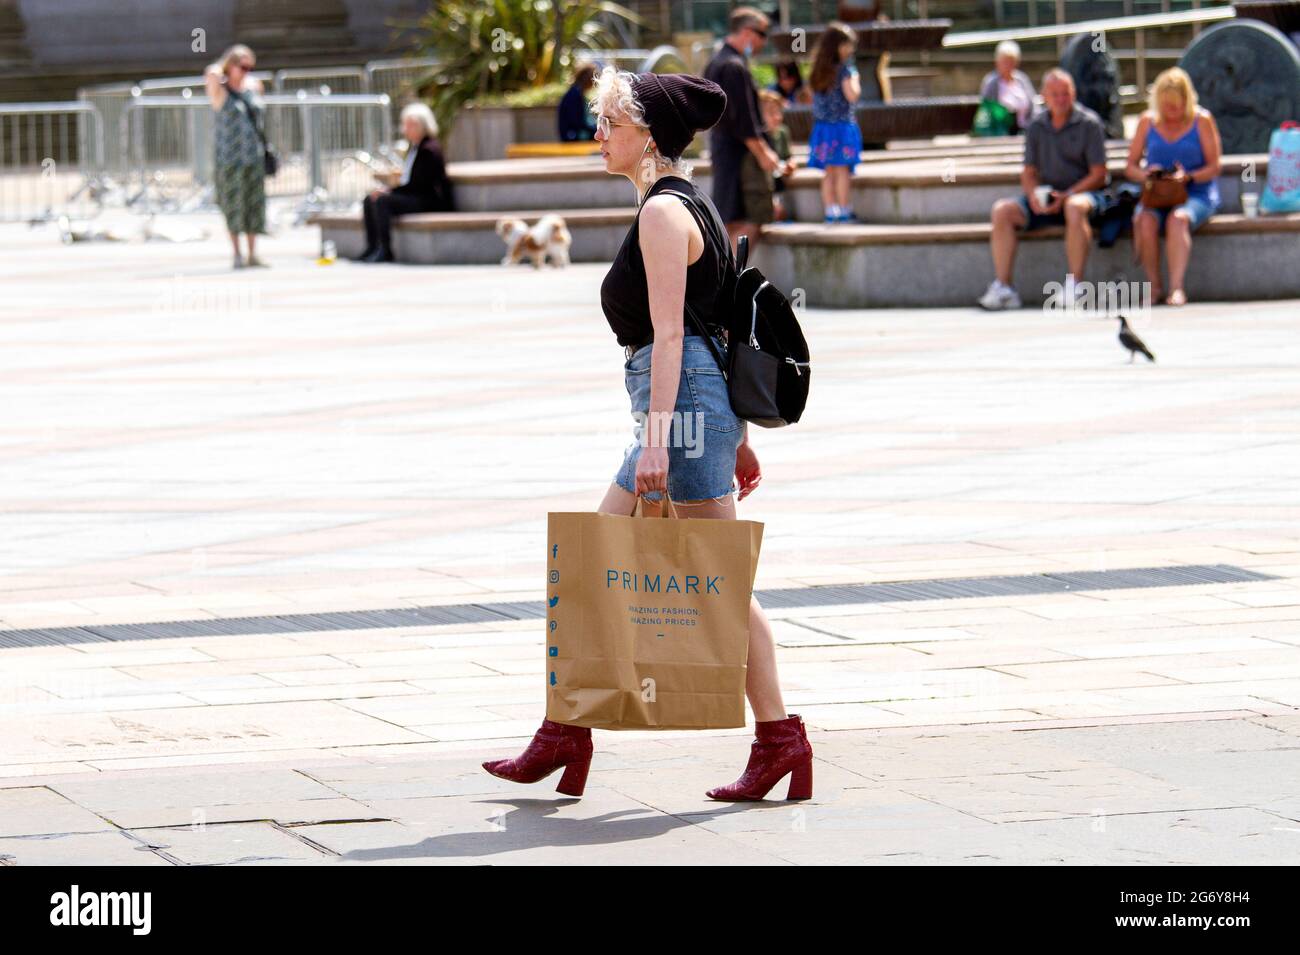 Dundee, Tayside, Scotland, UK. 9th July, 2021. UK Weather: Humid day with a warm breeze and sunny intervals across North East Scotland with temperatures reaching 18°C. A young fashionable woman with red boots holding a Primark fashion retail store paper carrier bag after a day out shopping in Dundee city centre. Credit: Dundee Photographics/Alamy Live News Stock Photo